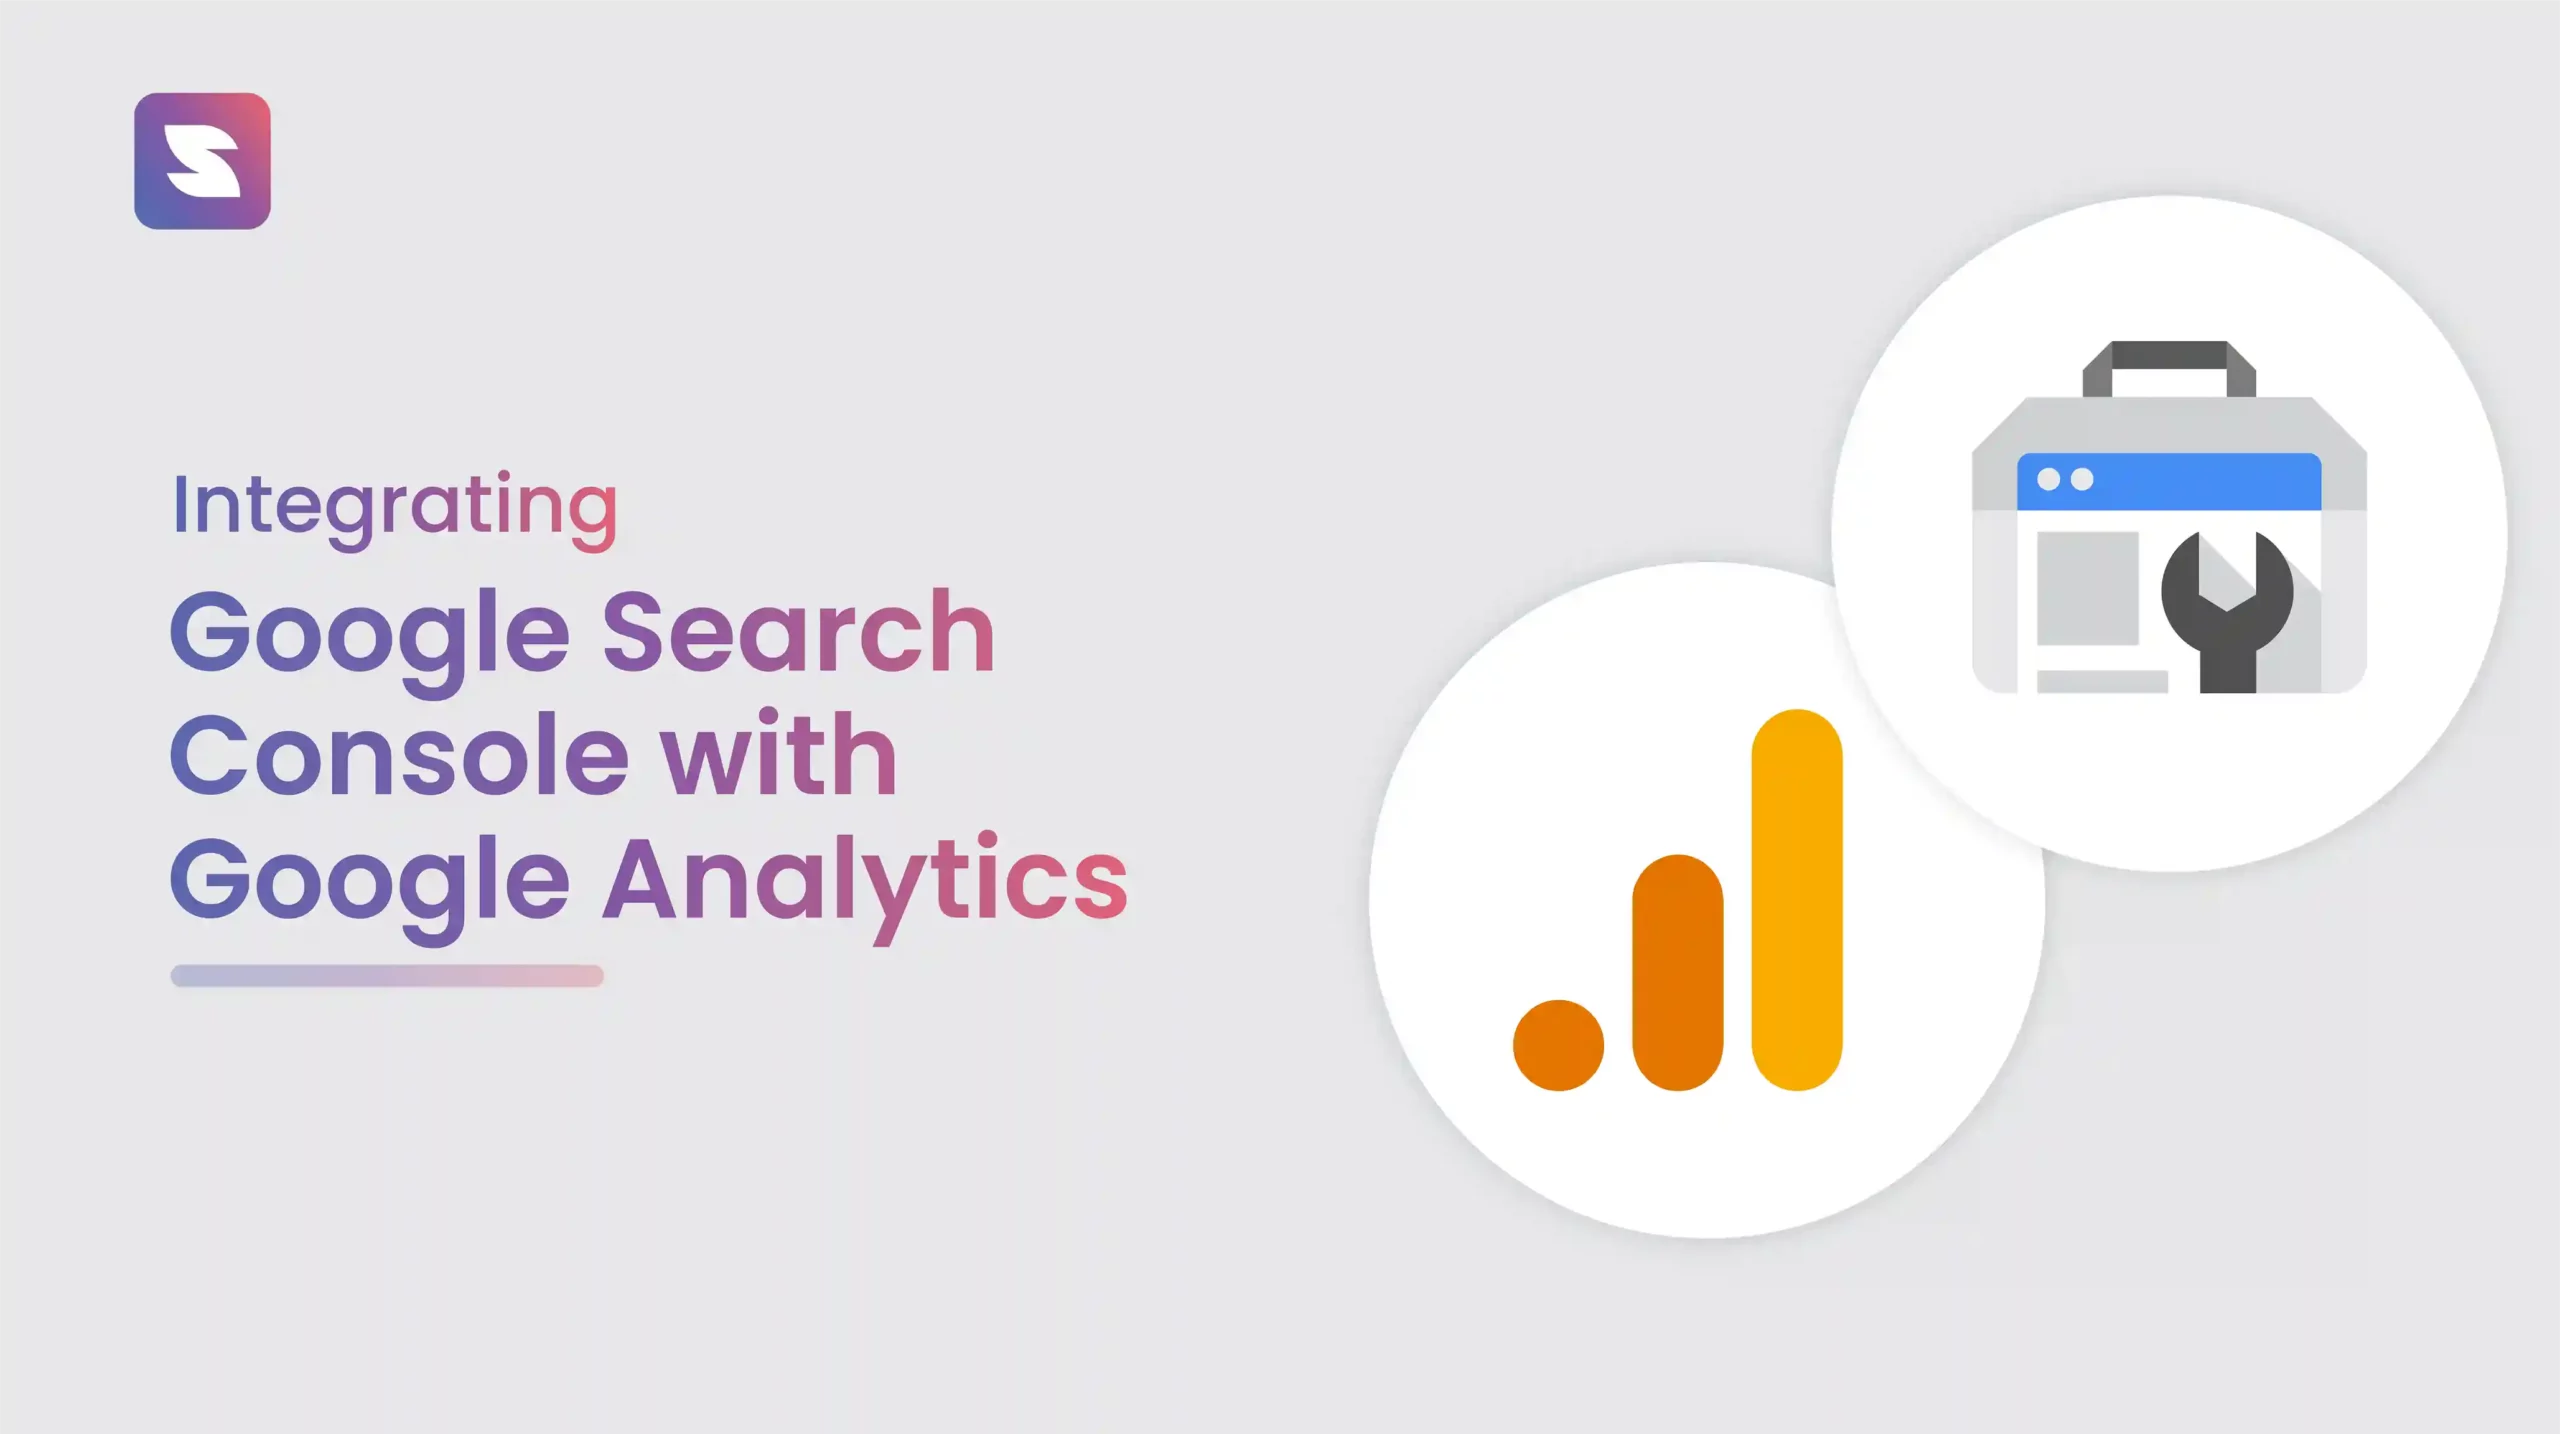 Google Search Console with Google Analytics